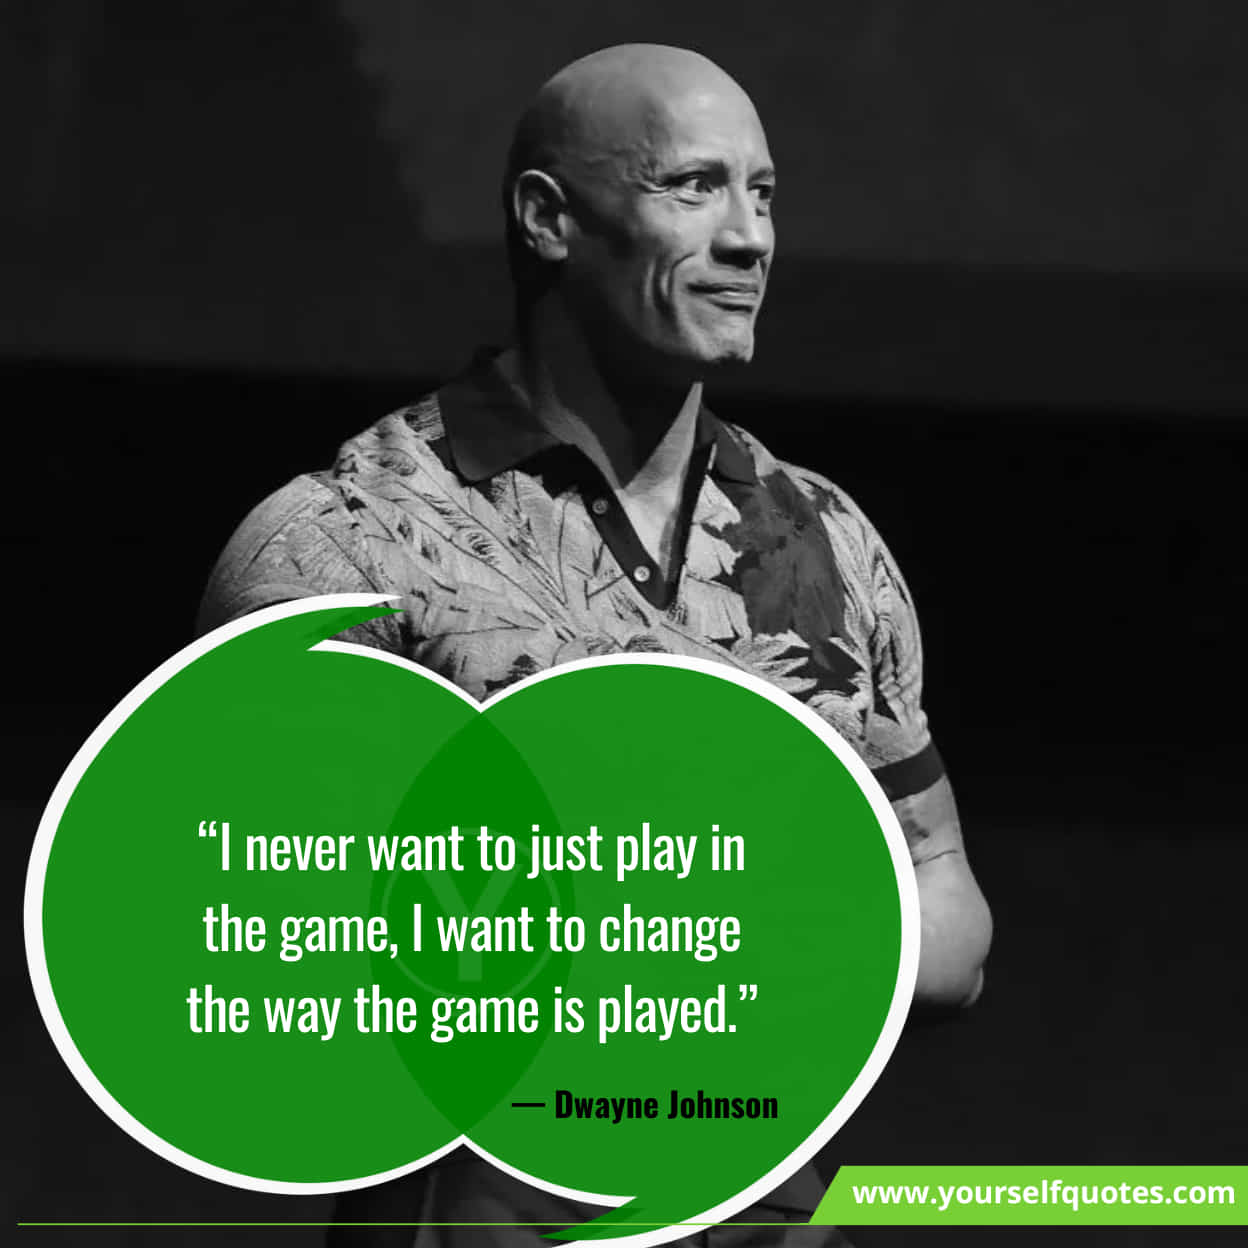 Inspirational Quotes By Dwayne Johnson